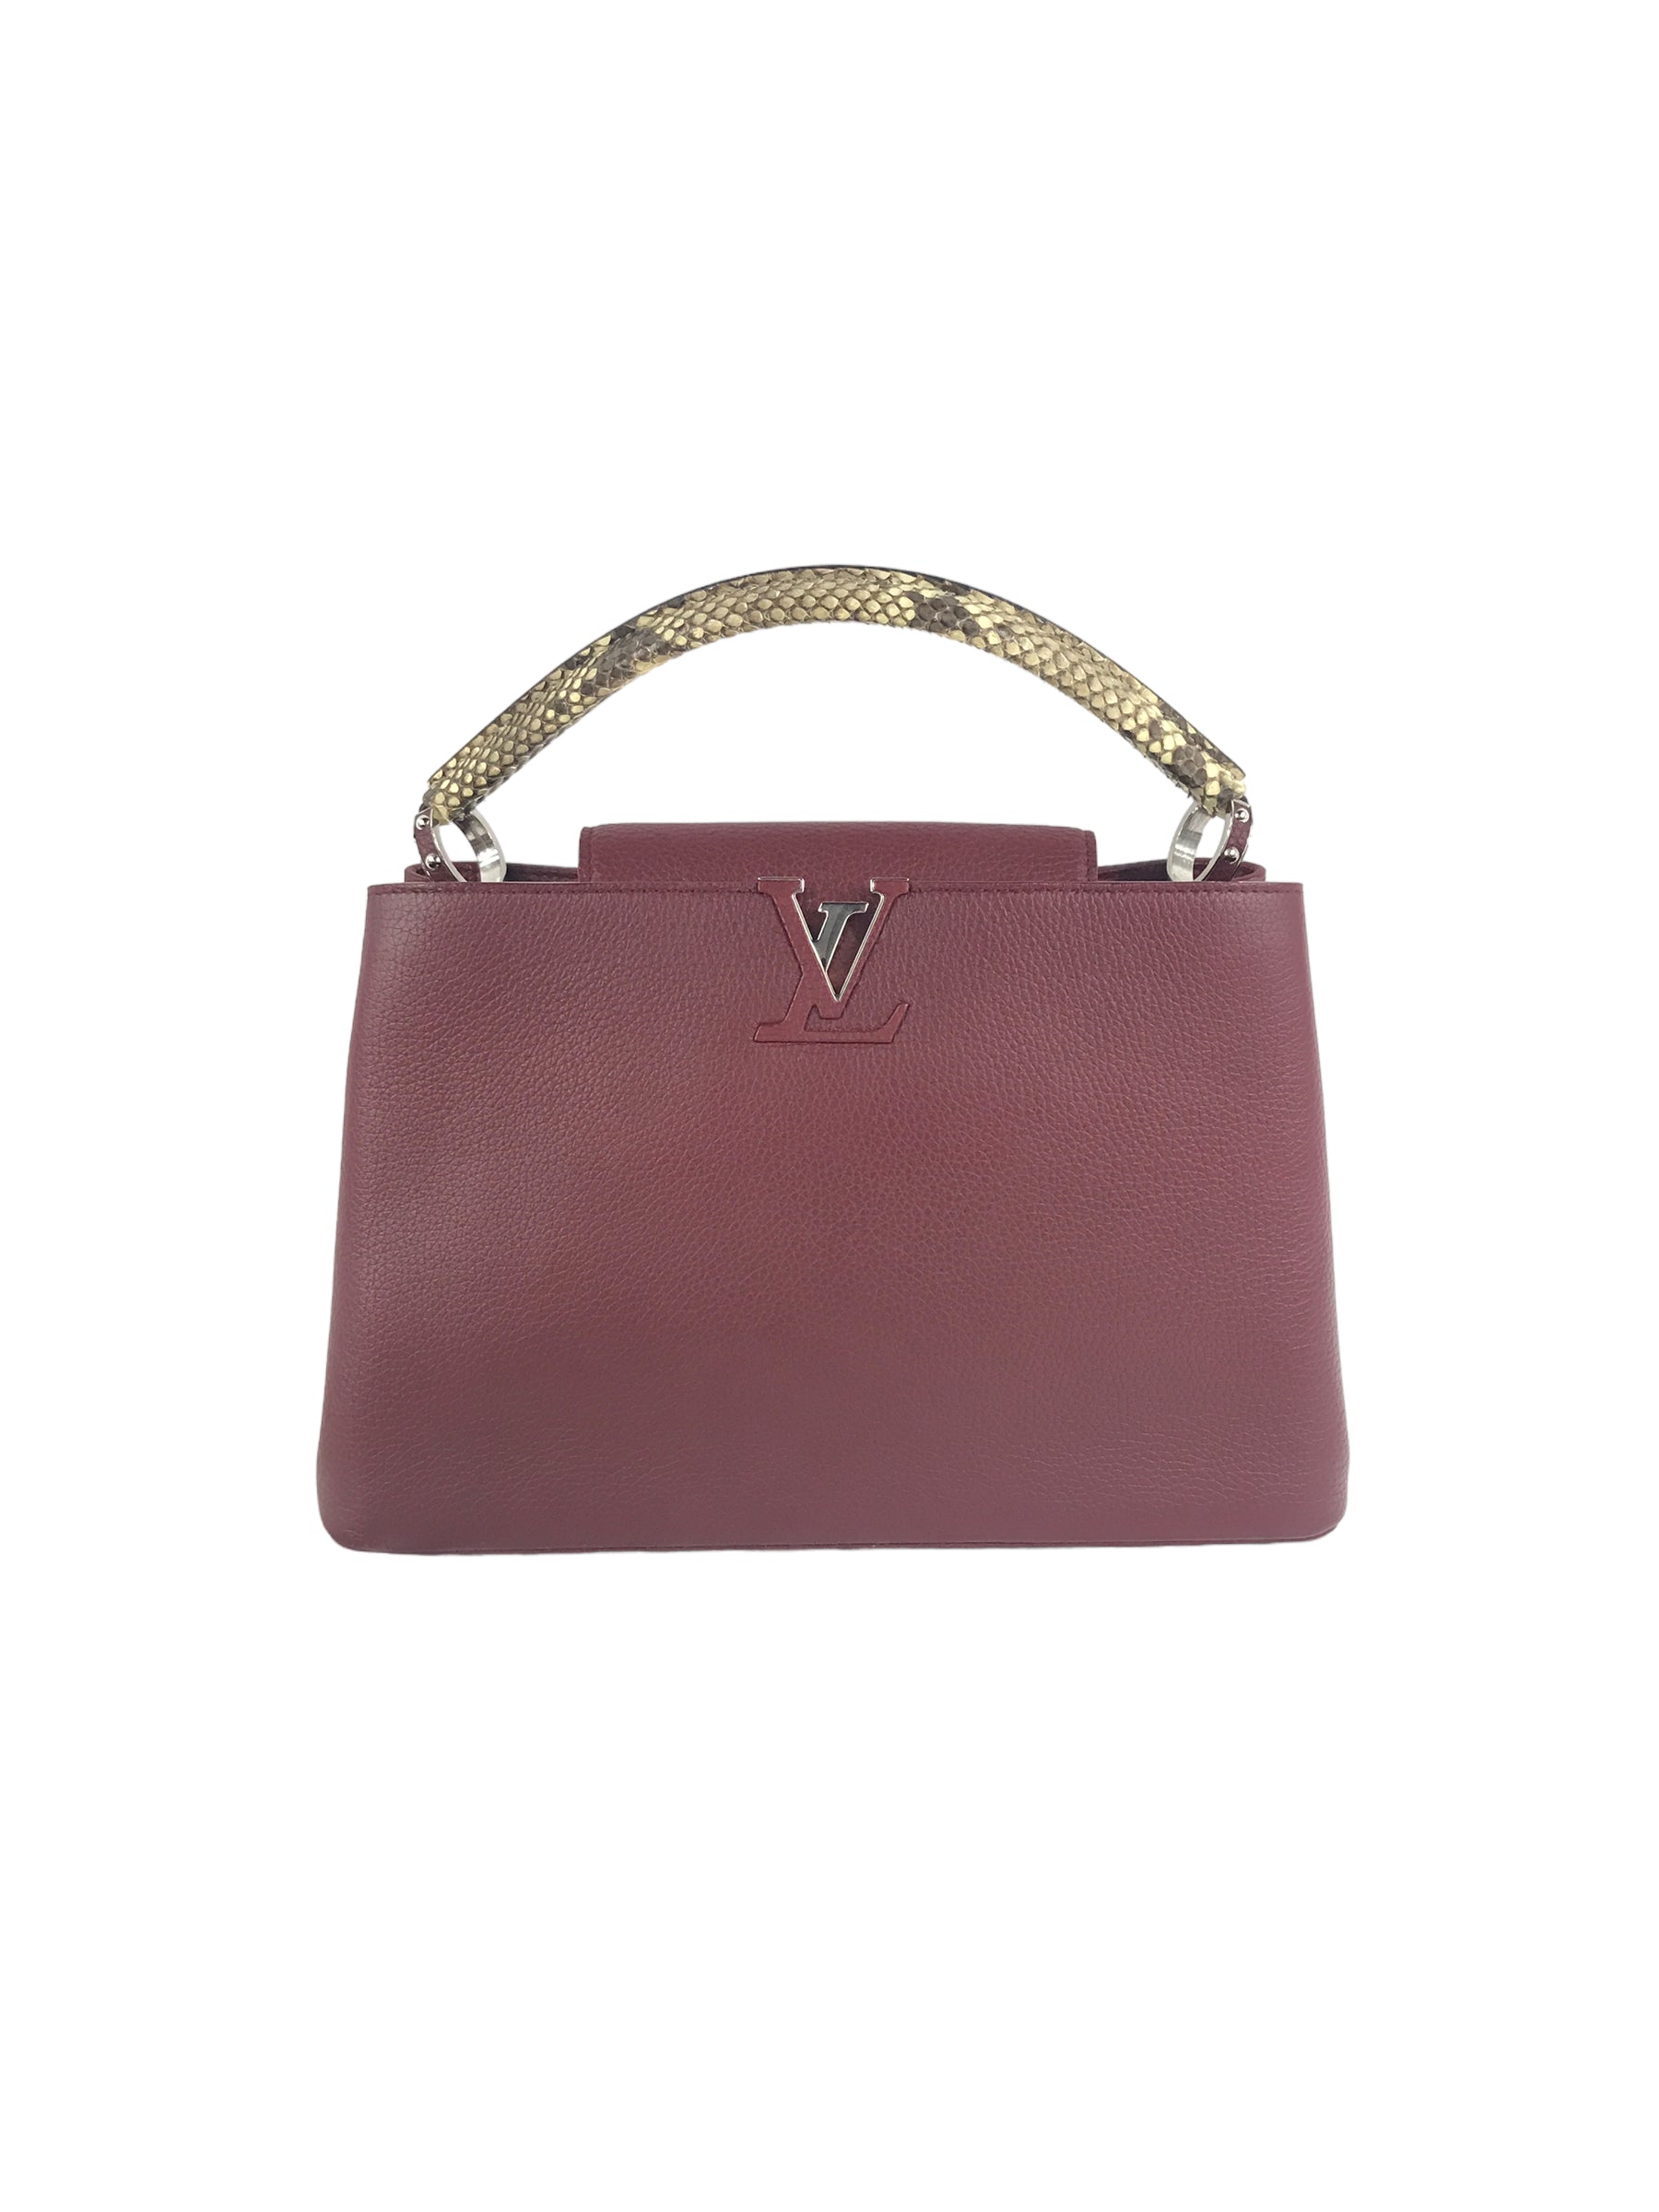 LOUIS VUITTON Taurillon Capucines BB Red Taupe 1154059